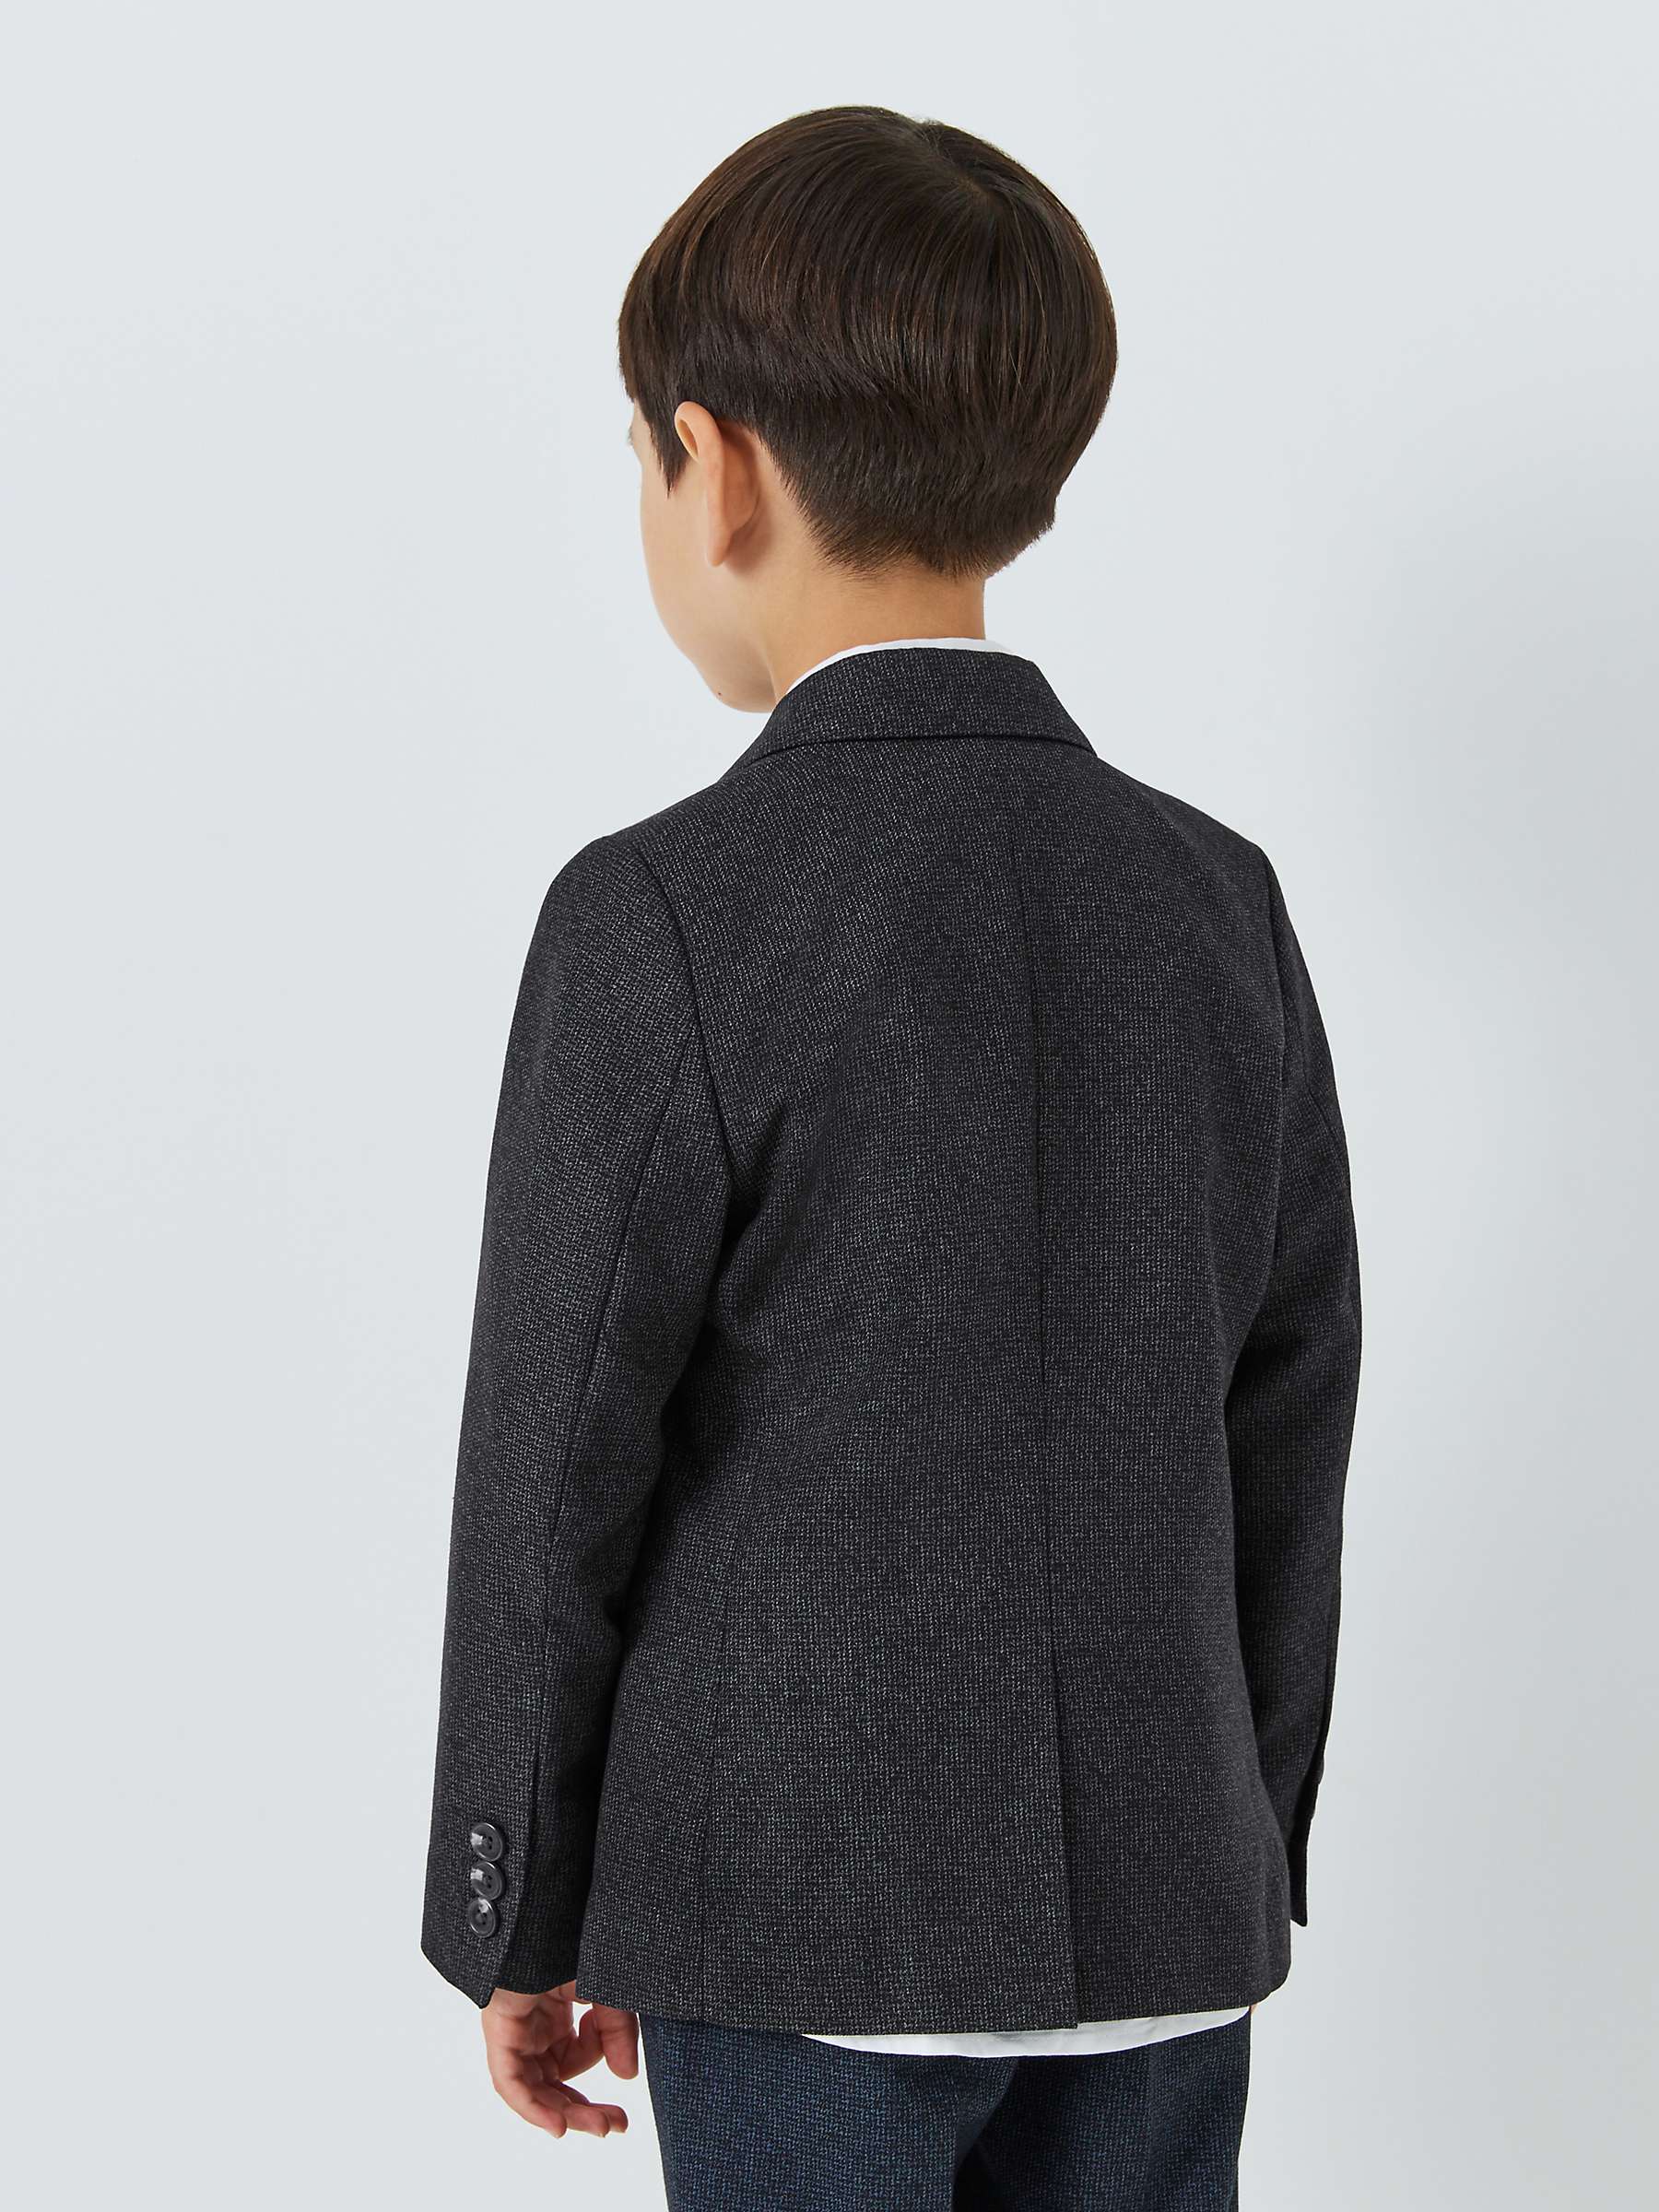 Buy John Lewis Heirloom Collection Kids' Relaxed Check Blazer, Grey Online at johnlewis.com